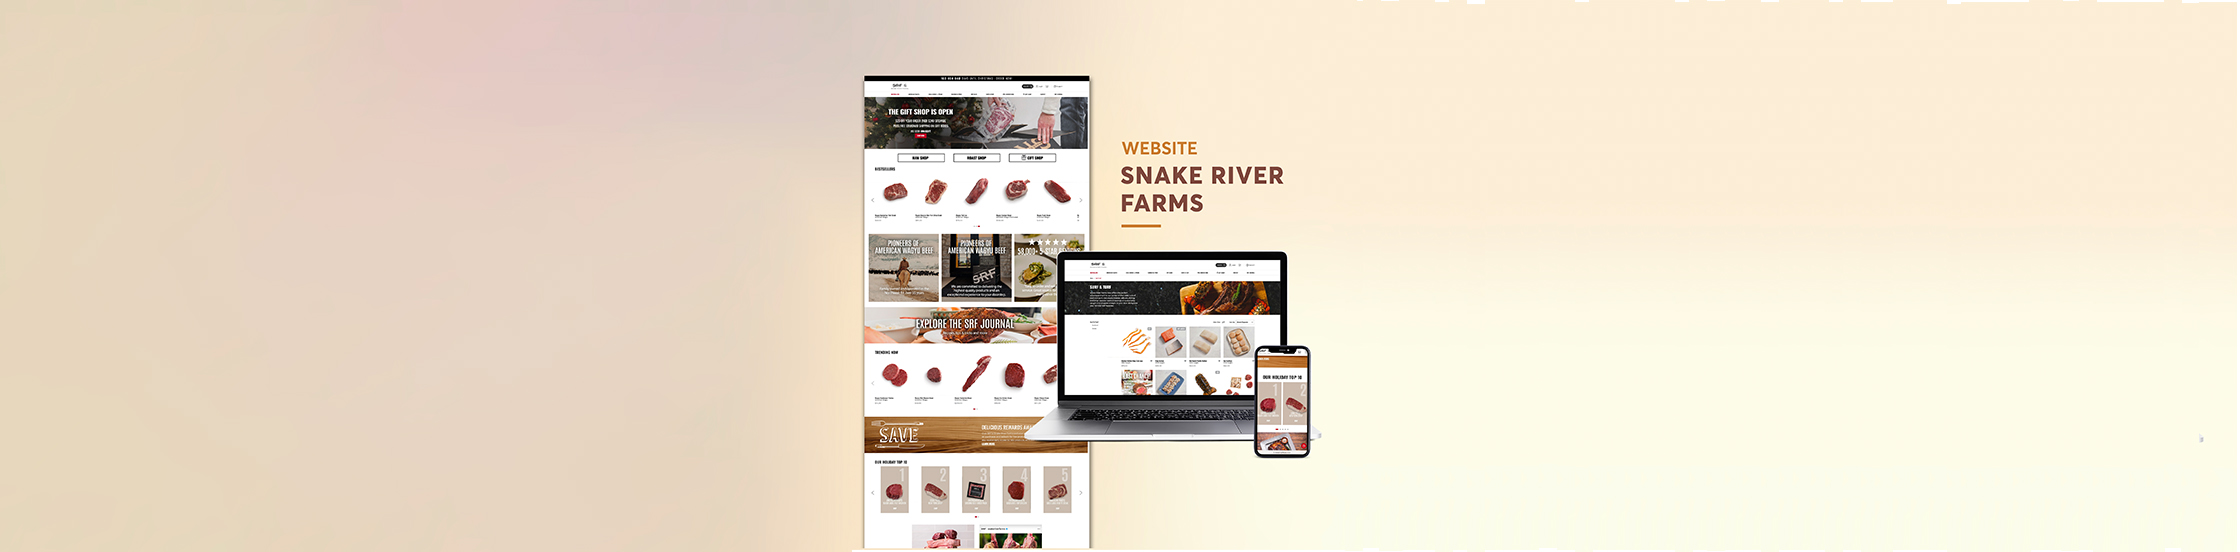 Thiết kế Website Snake River Farms